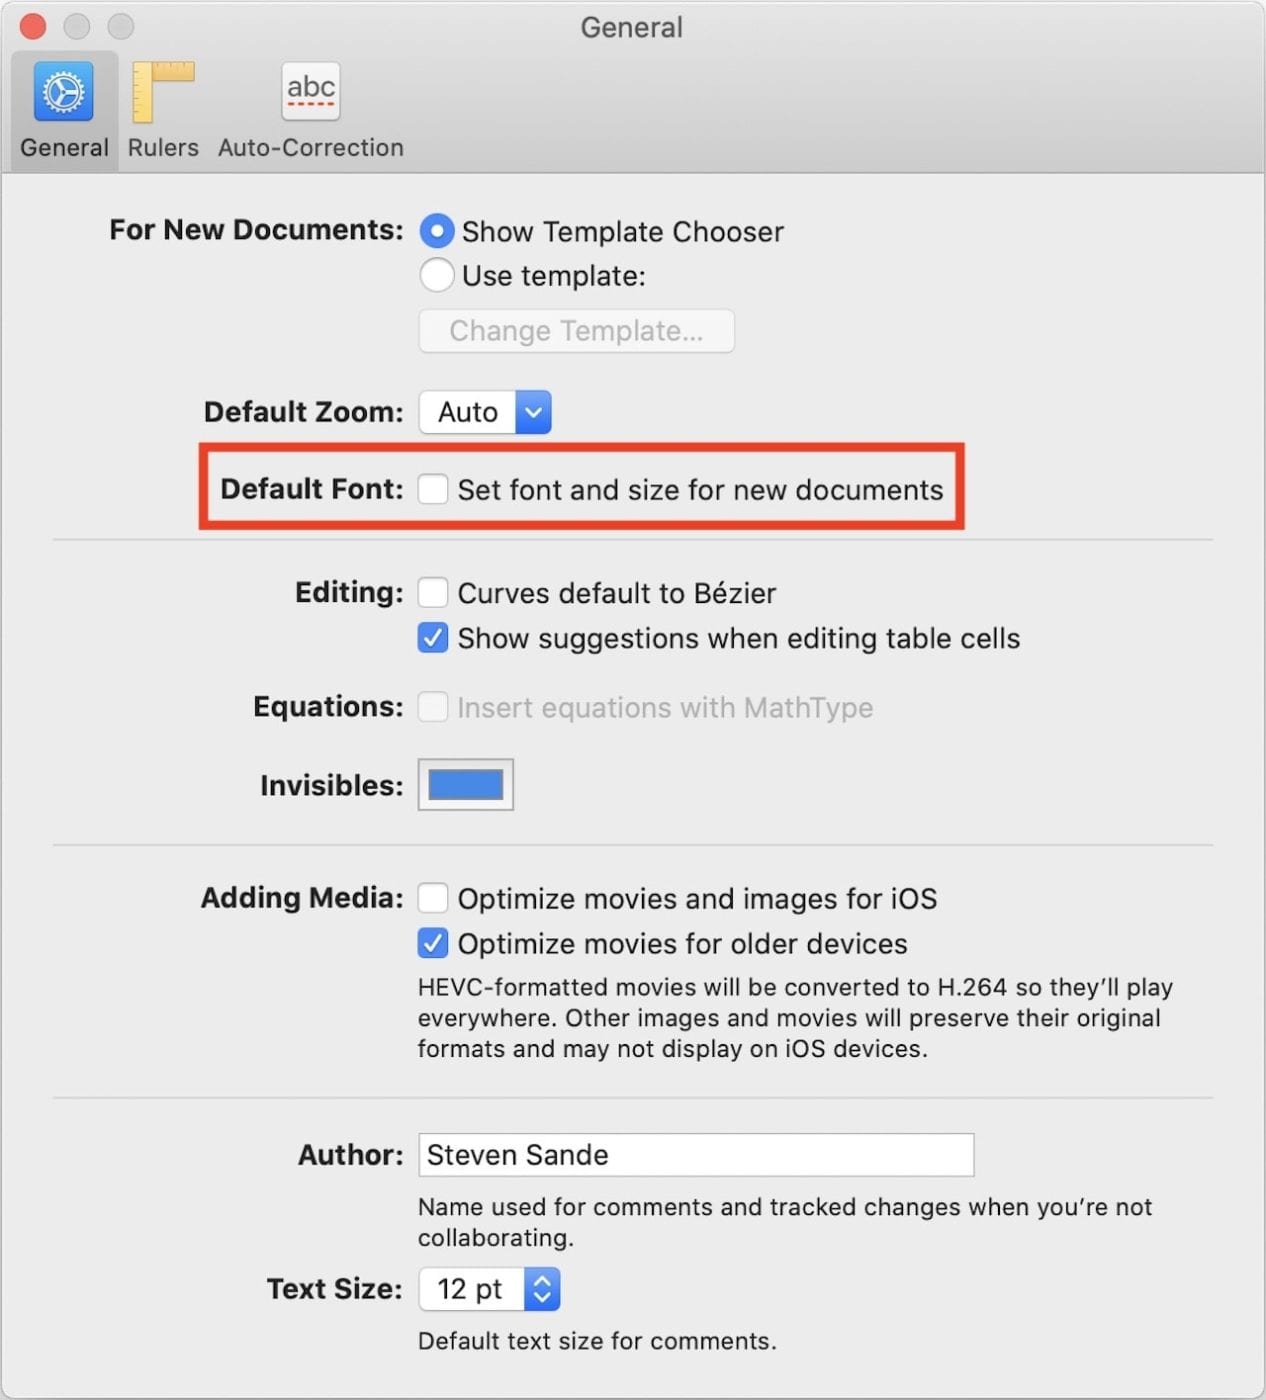 The setting for choosing a default font and size for new documents is highlighted in red.